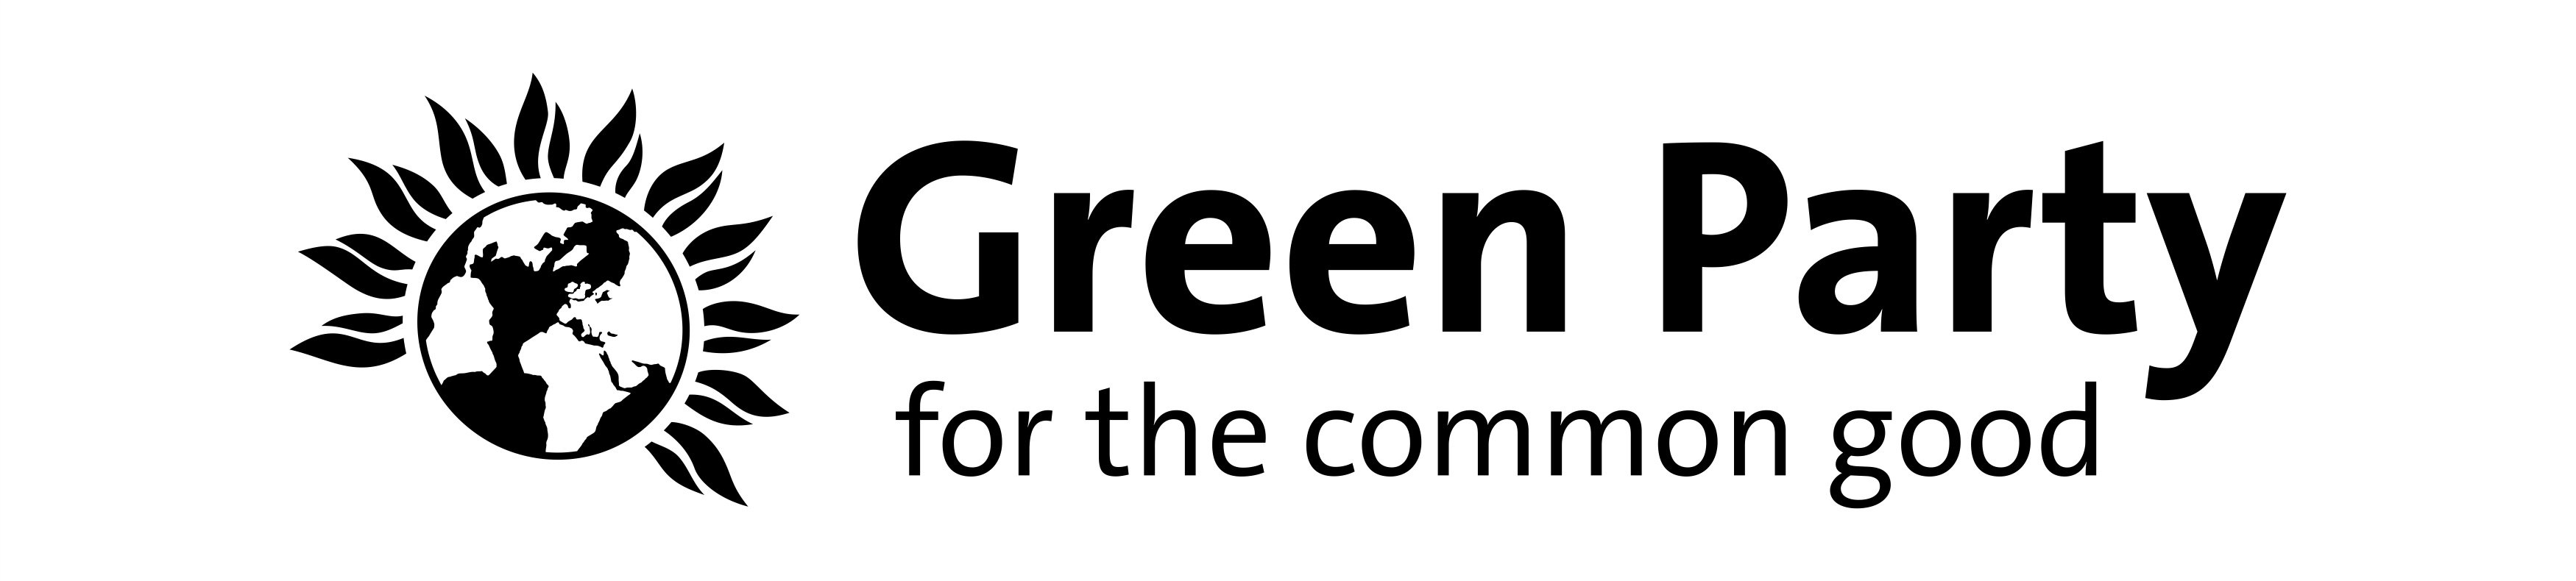 White and Green Oval Logo - Green Party Visual Identity